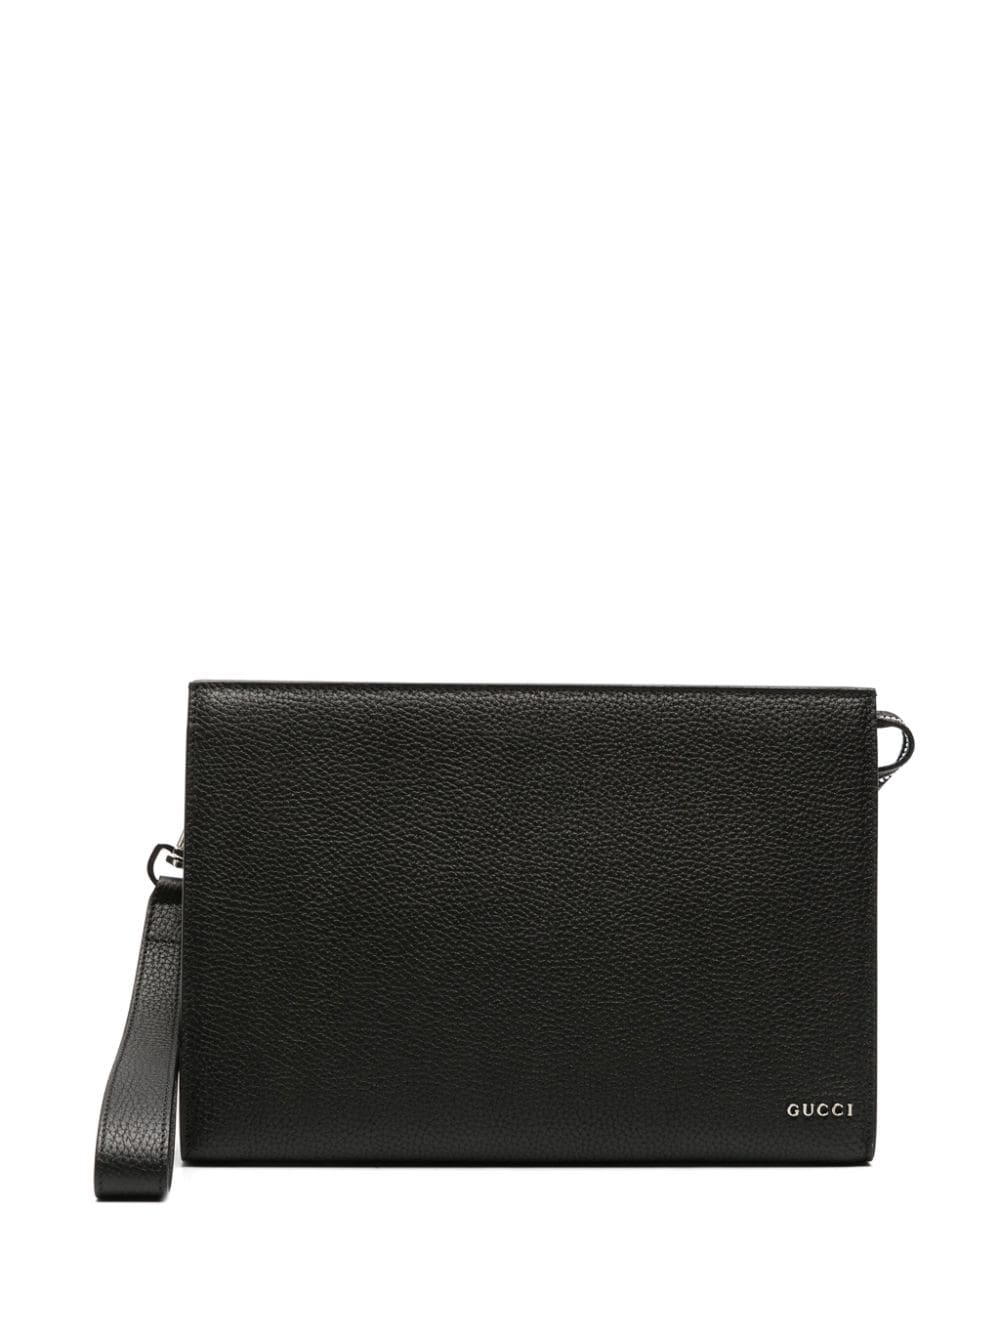 Gucci logo-lettering leather clutch bag - Nero